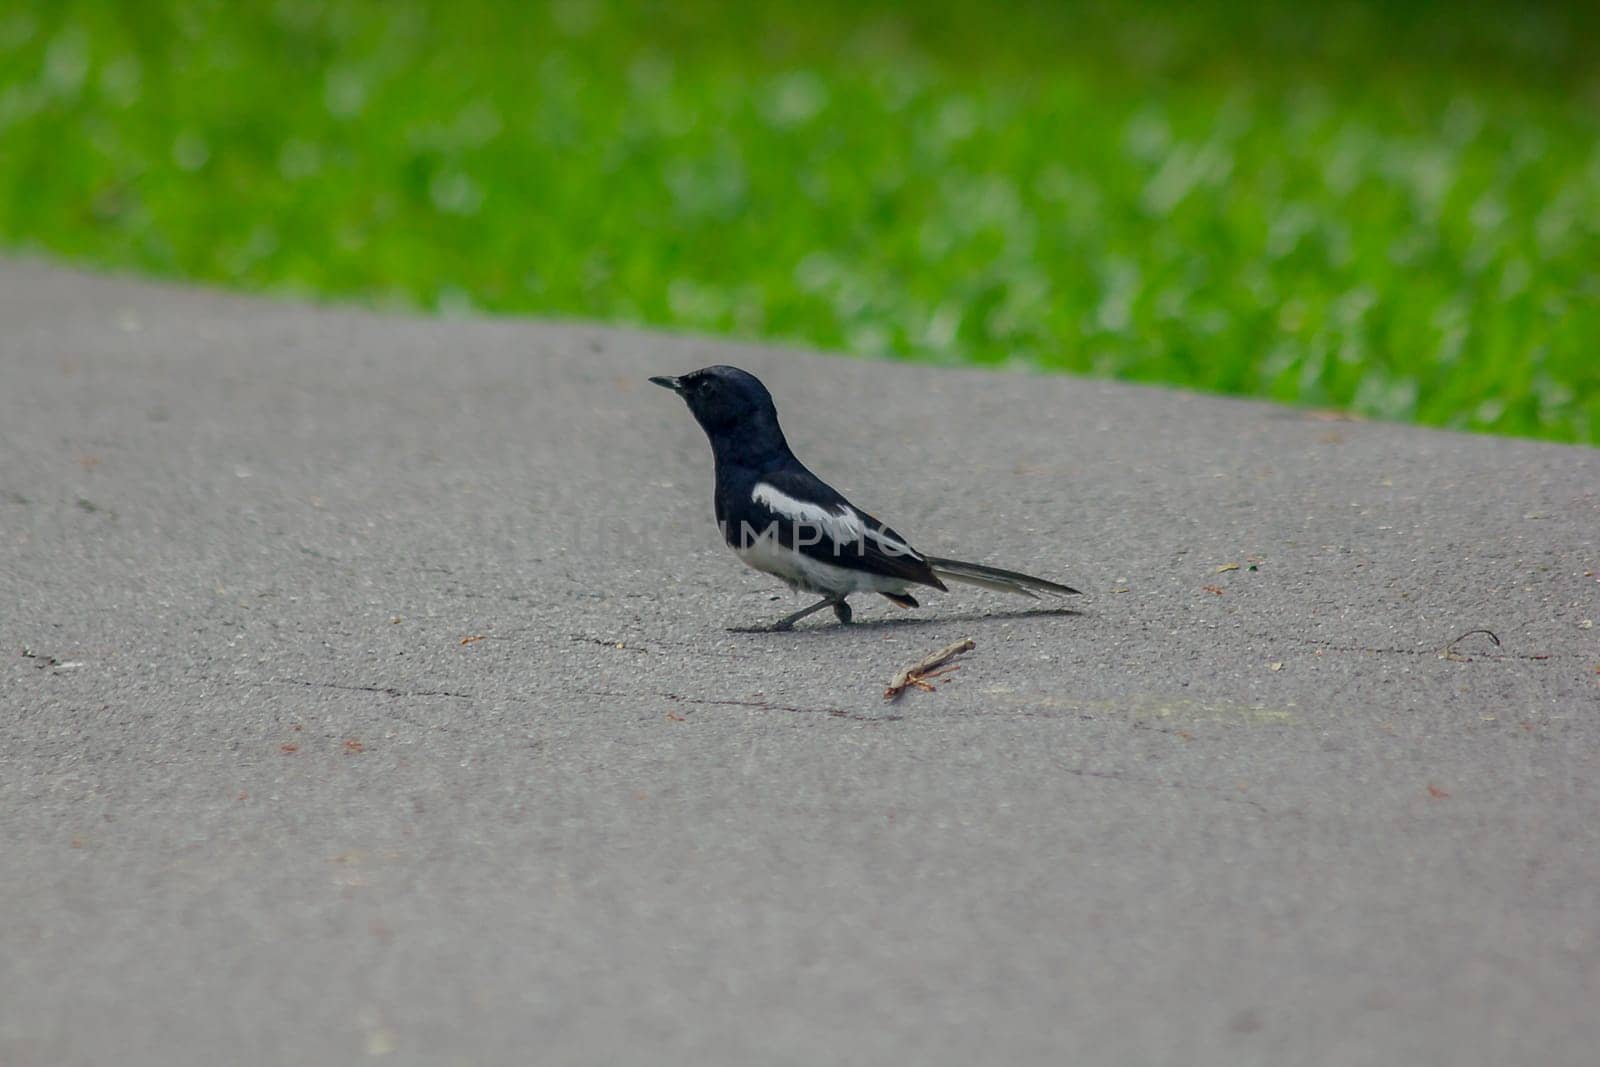 Magpie is on the ground.